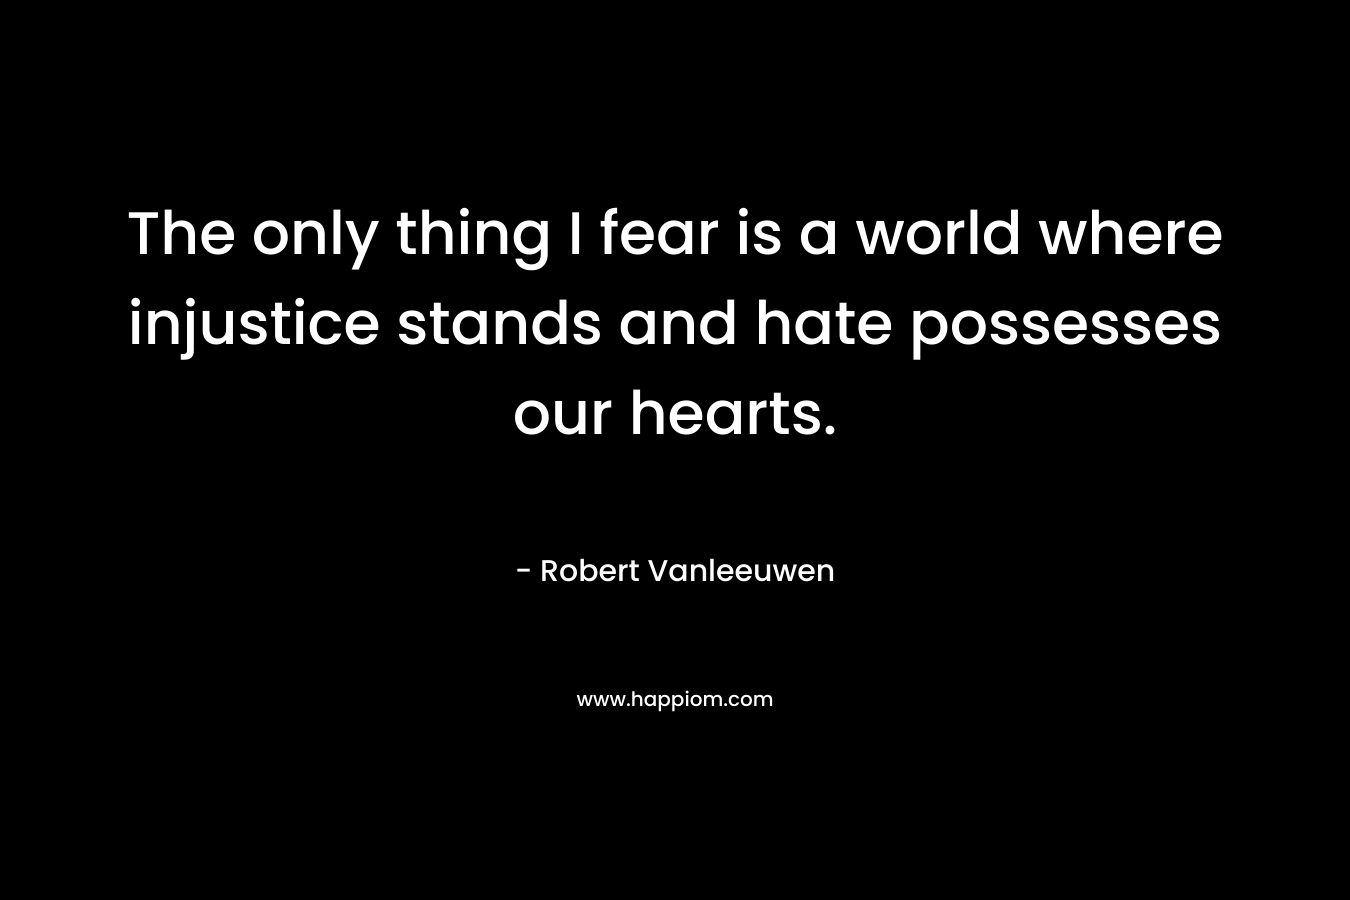 The only thing I fear is a world where injustice stands and hate possesses our hearts.